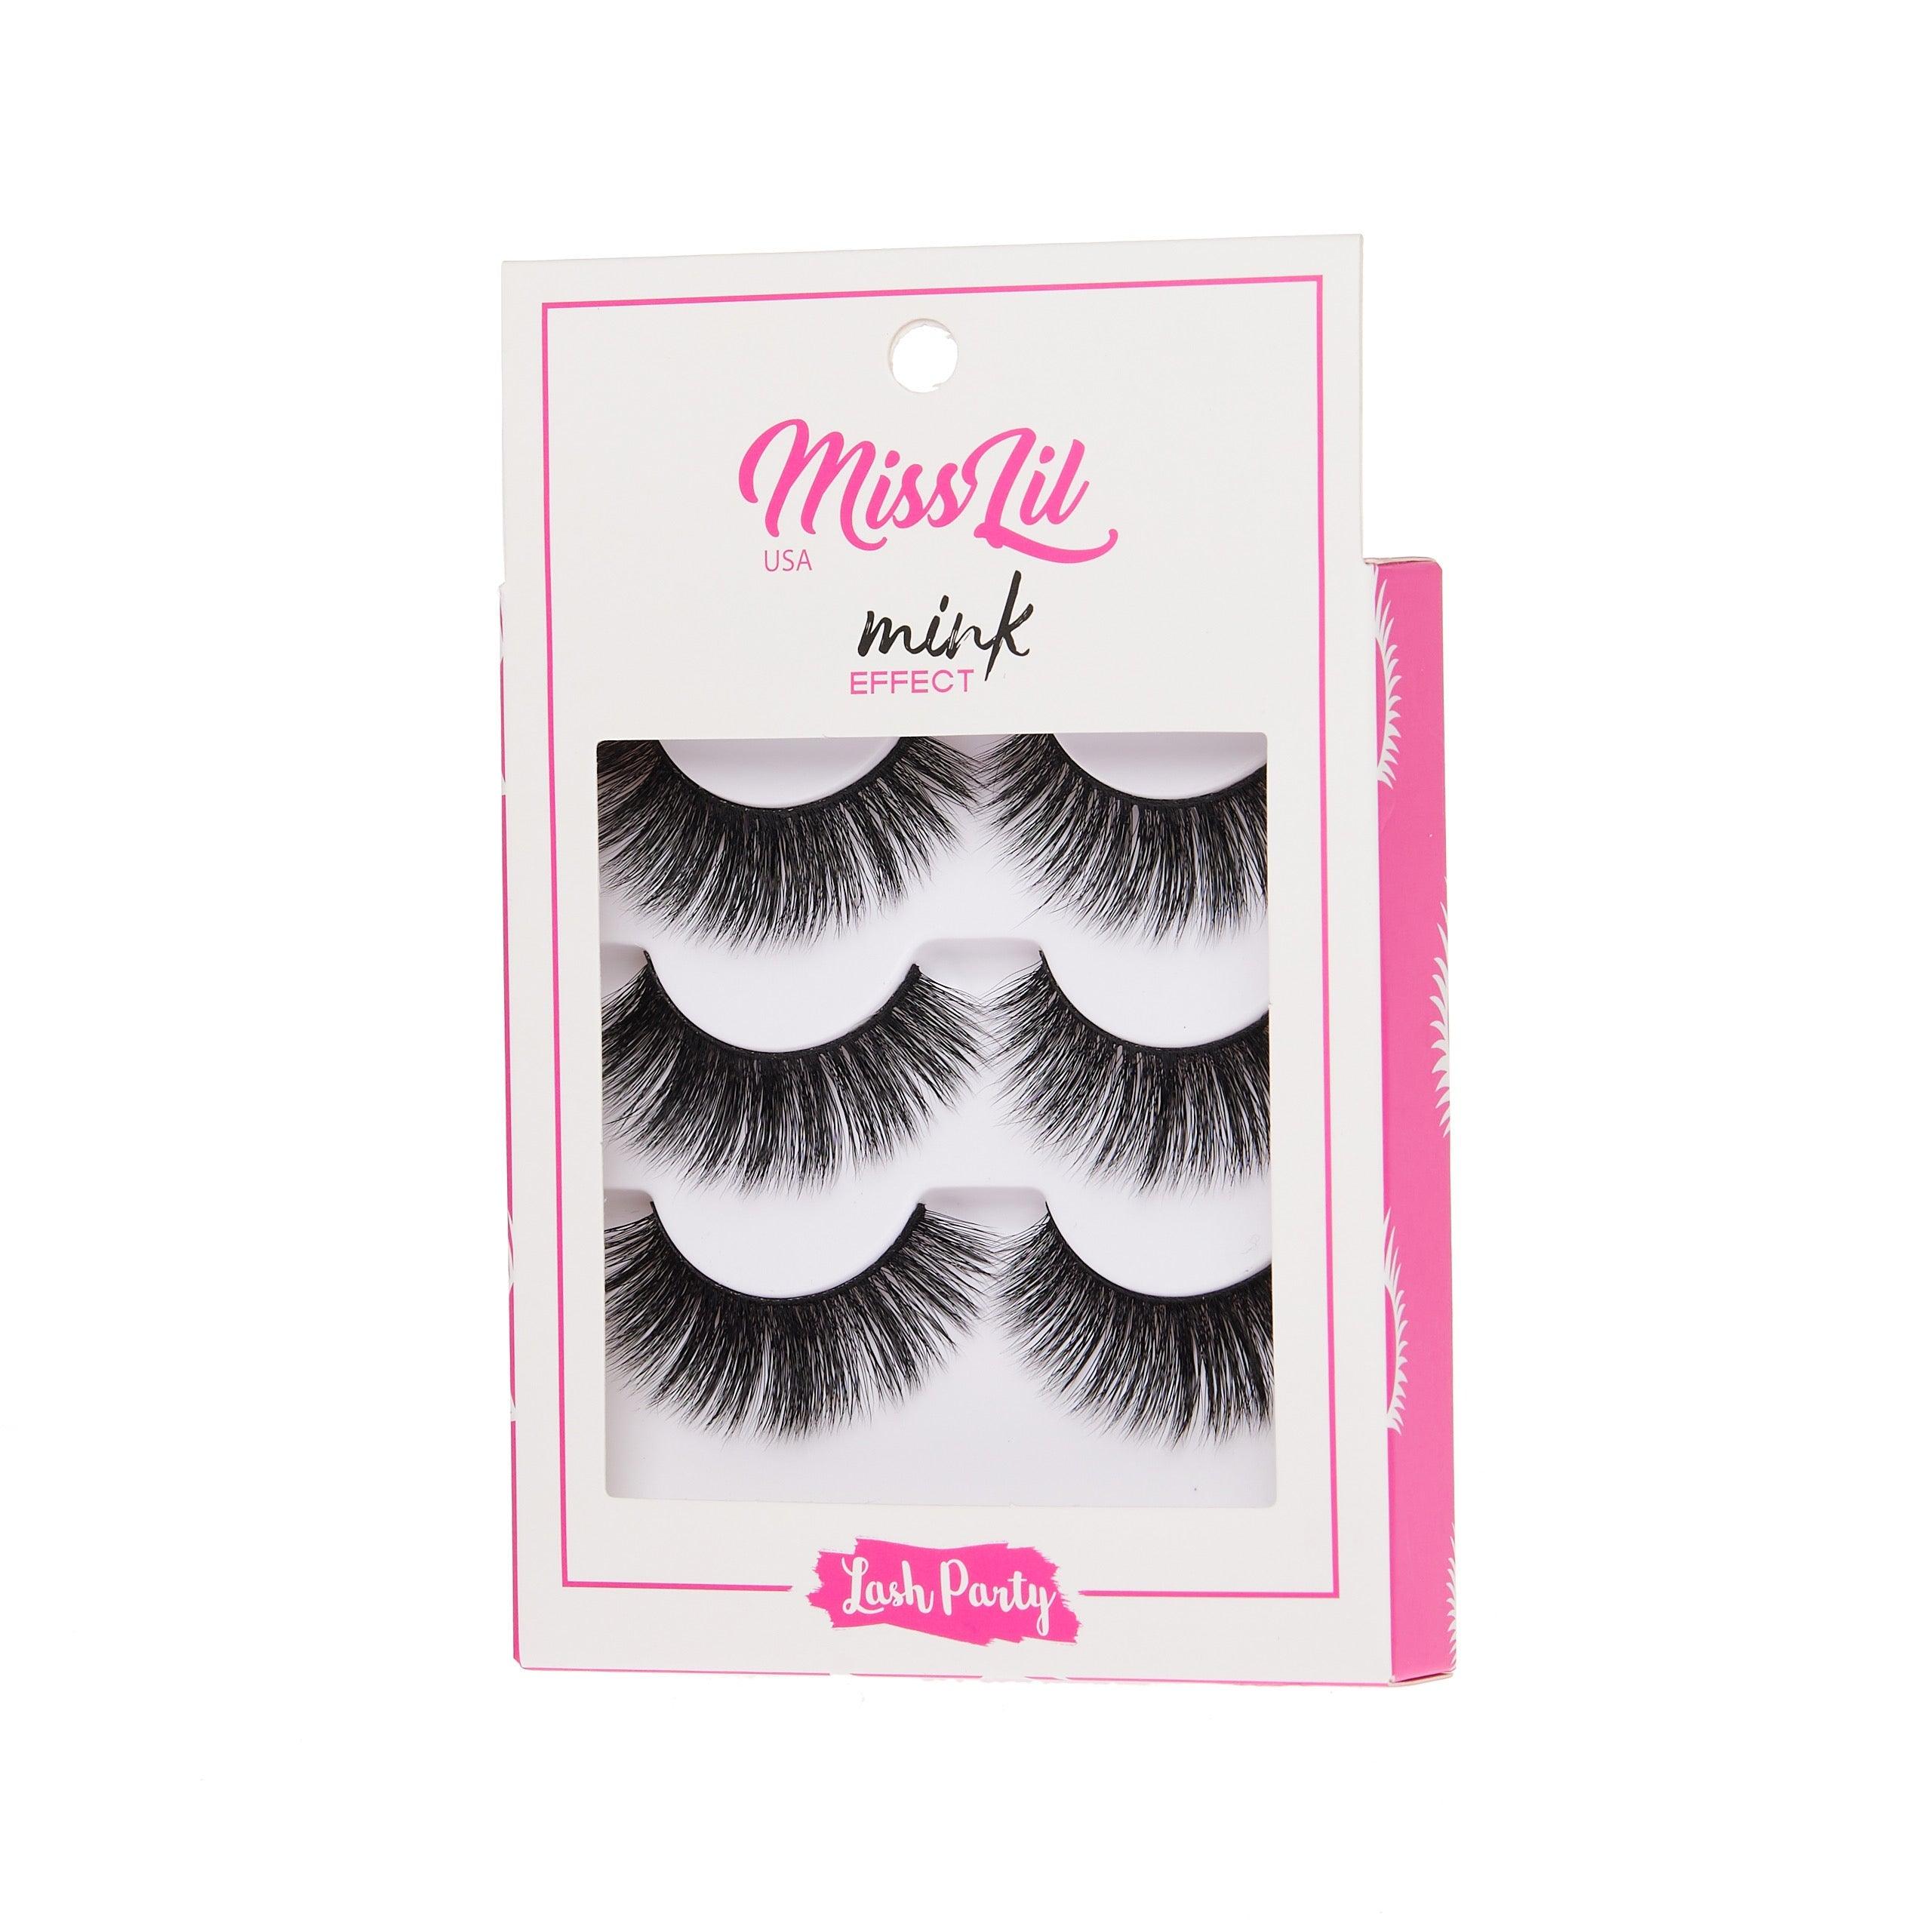 3-Pair Faux Mink Effect Eyelashes - Lash Party Collection #11 - Pack of 12 - Miss Lil USA